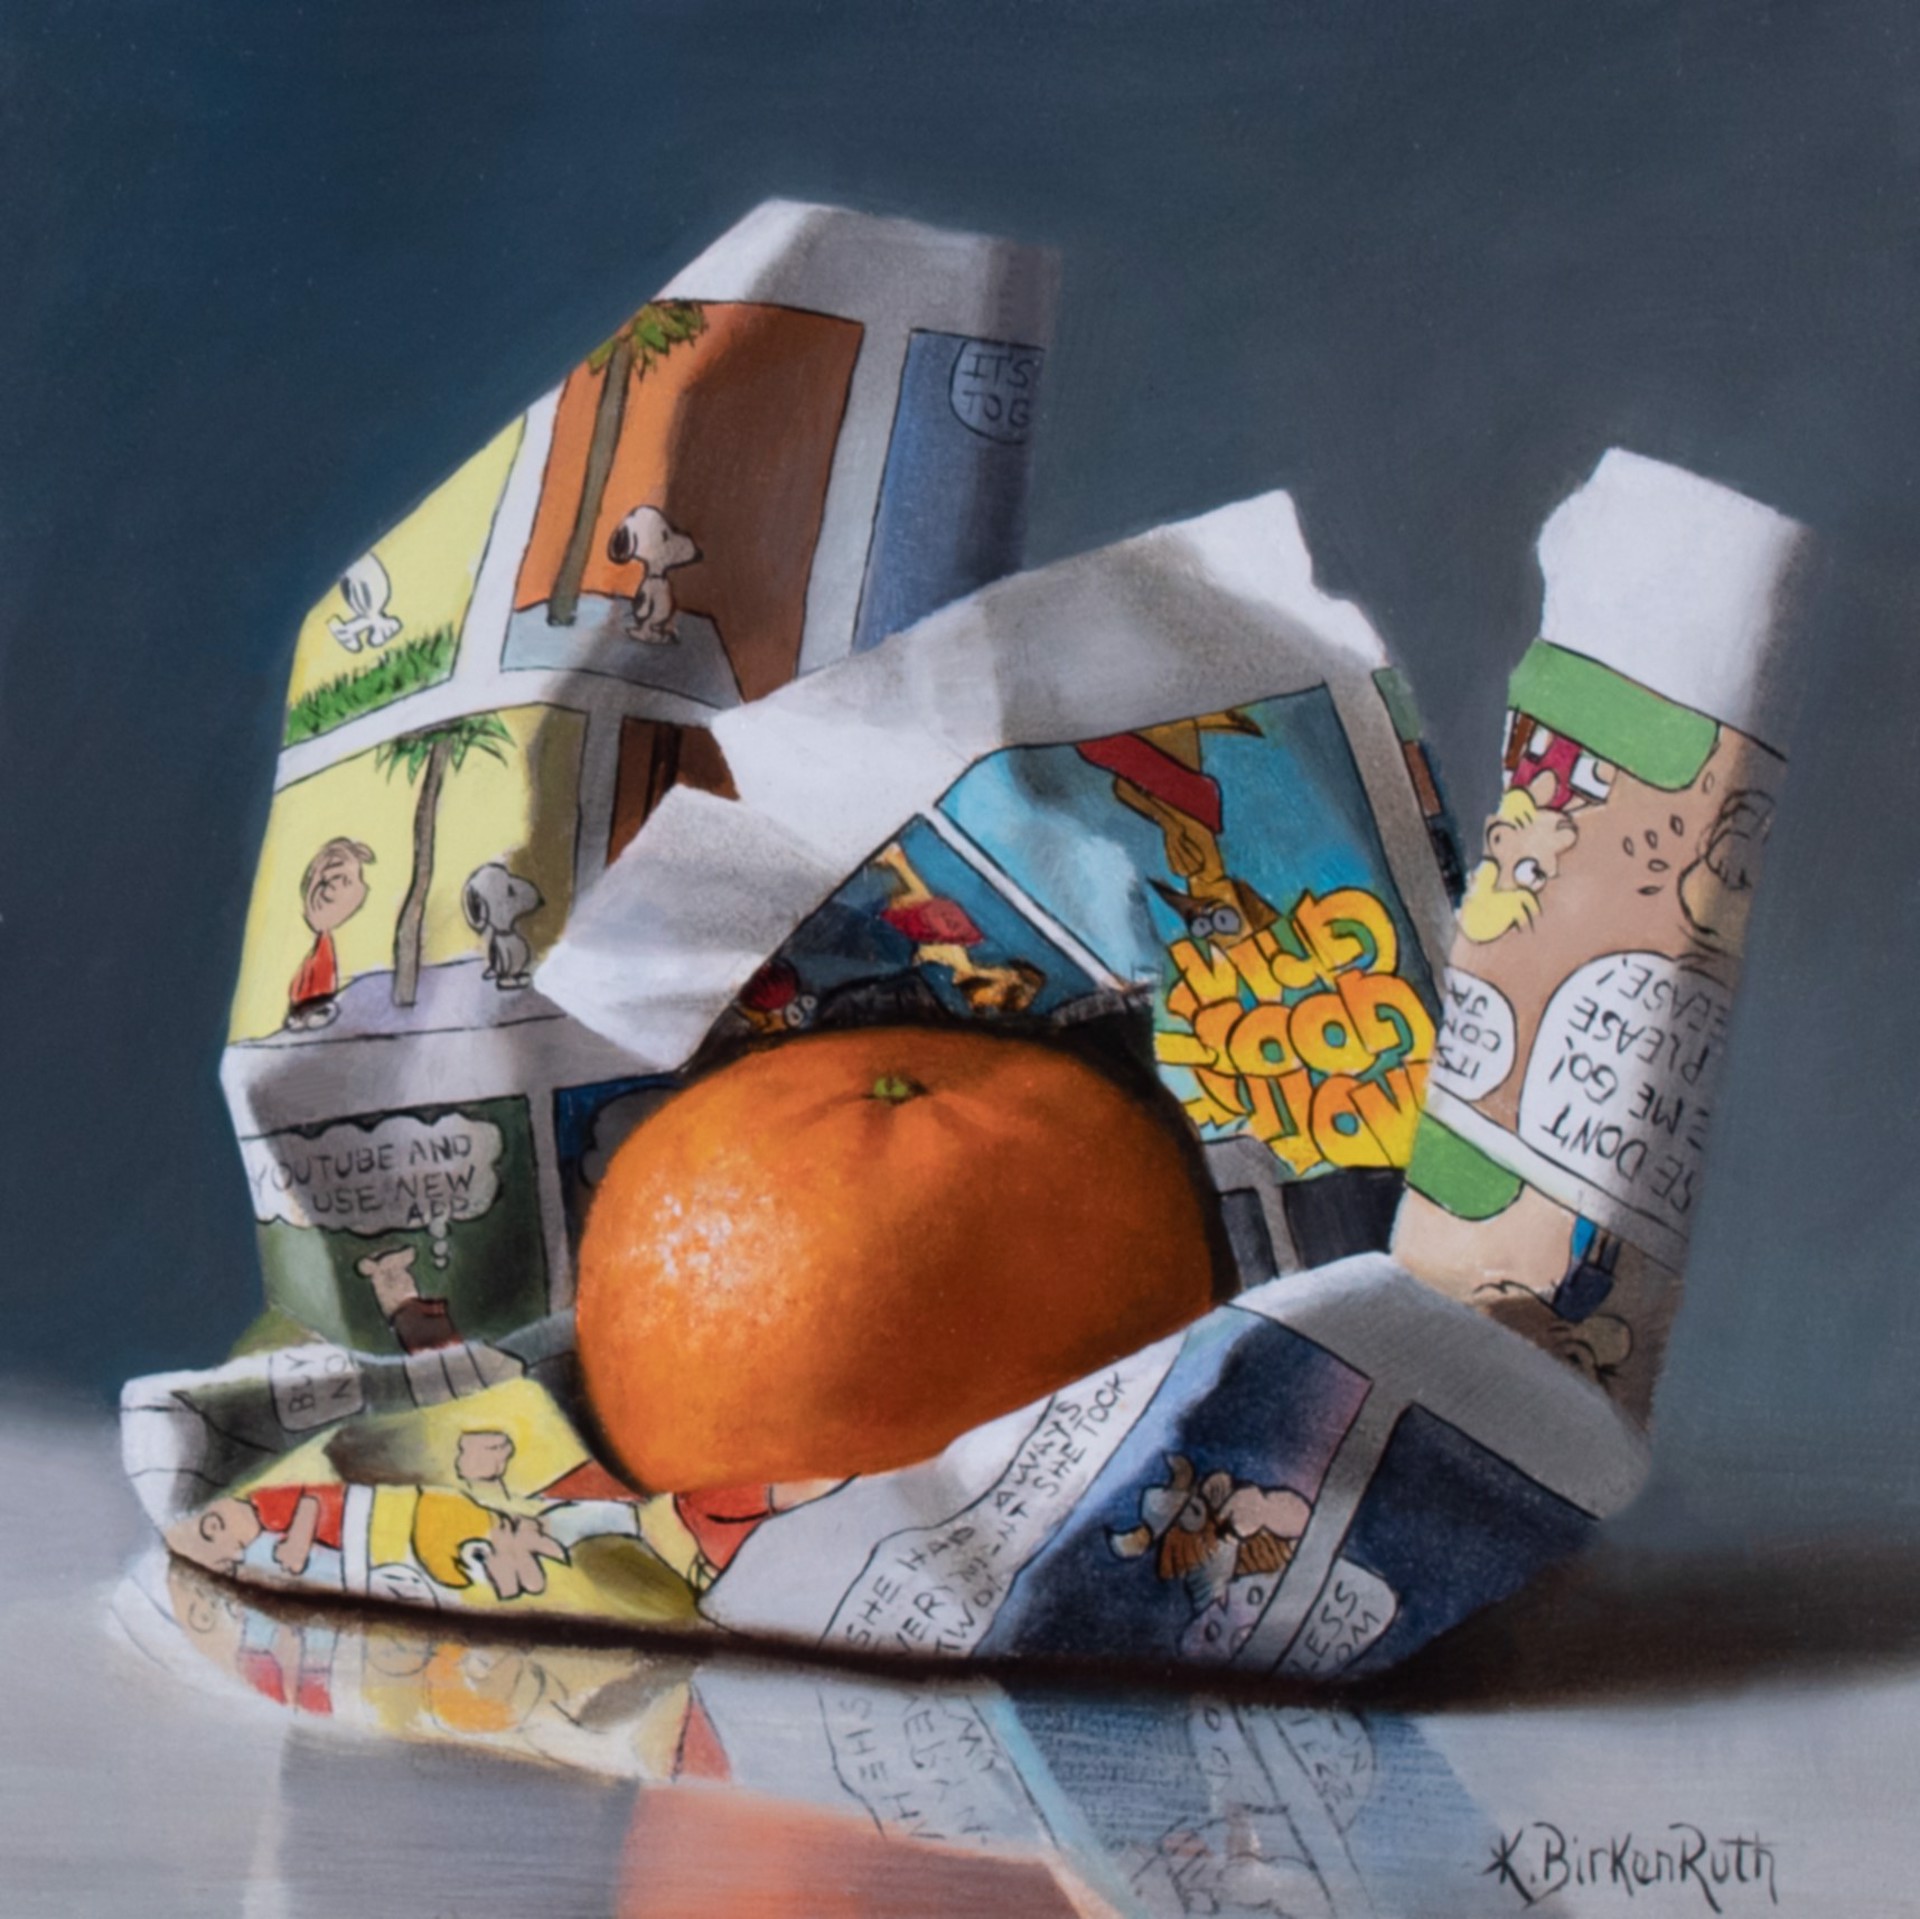 A Comical Clementine by Kelly Birkenruth